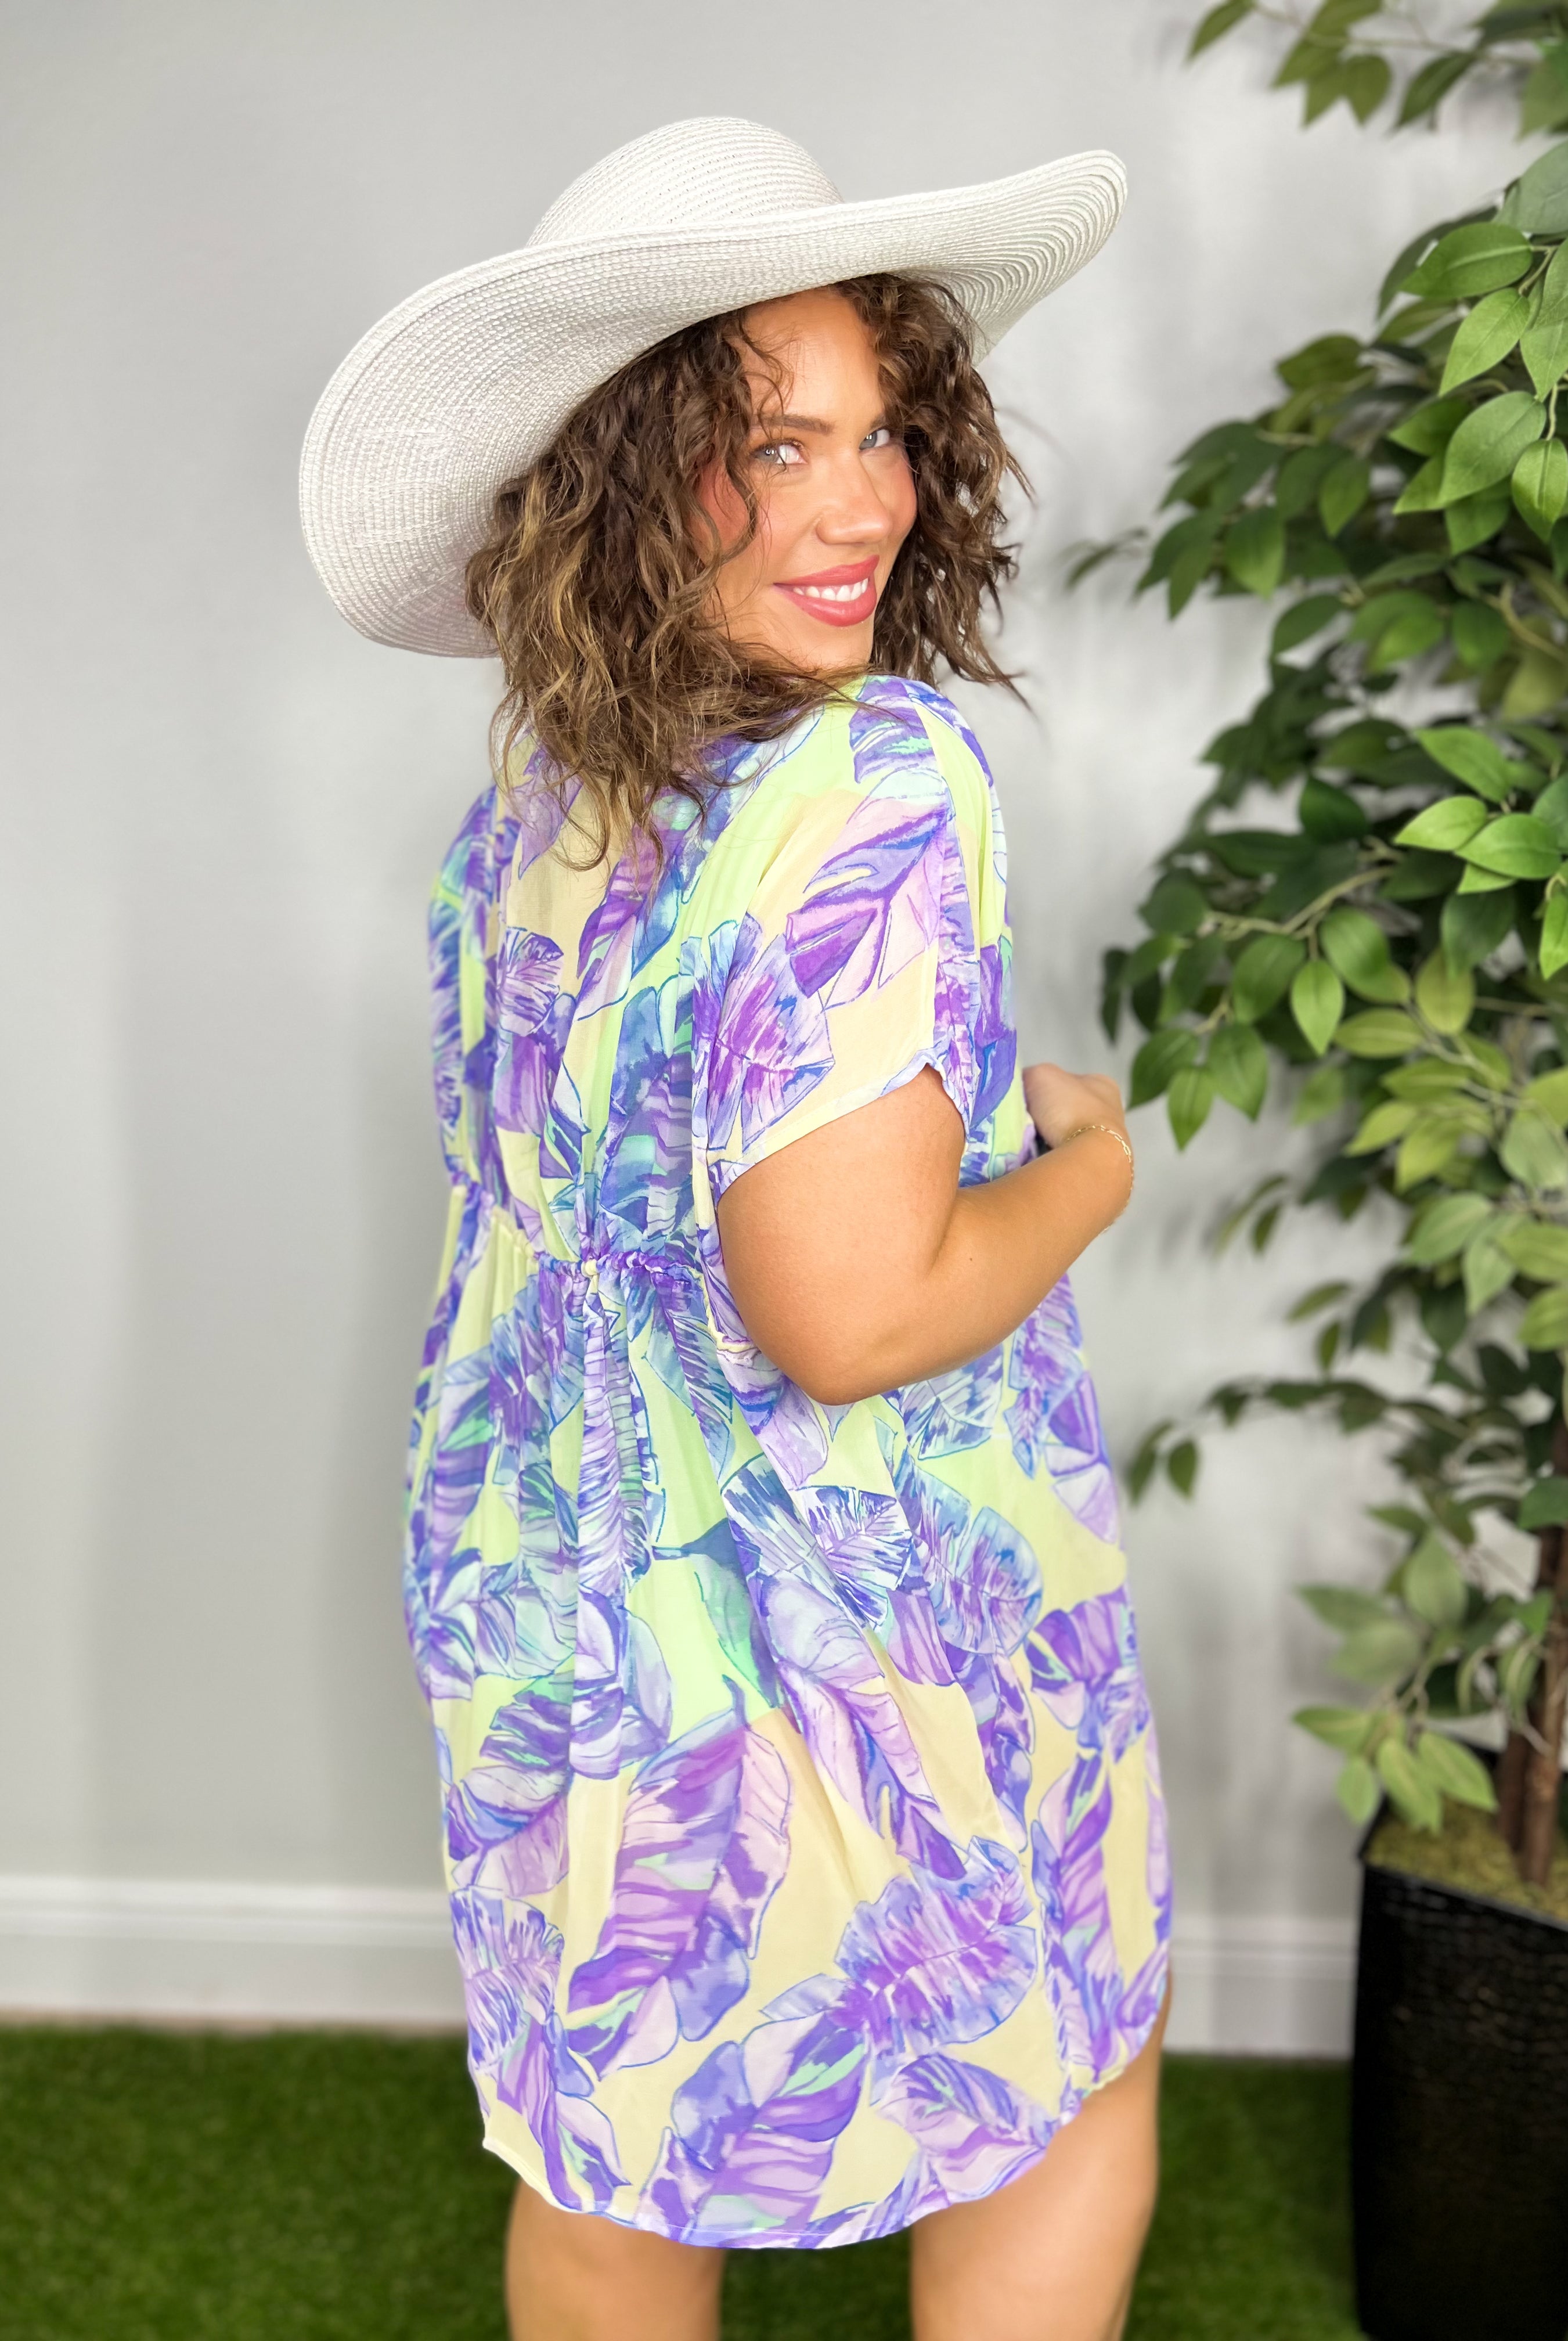 Blooming Beauty Cover Up-220 Cardigans/ Kimonos-P.S. Kate-Heathered Boho Boutique, Women's Fashion and Accessories in Palmetto, FL